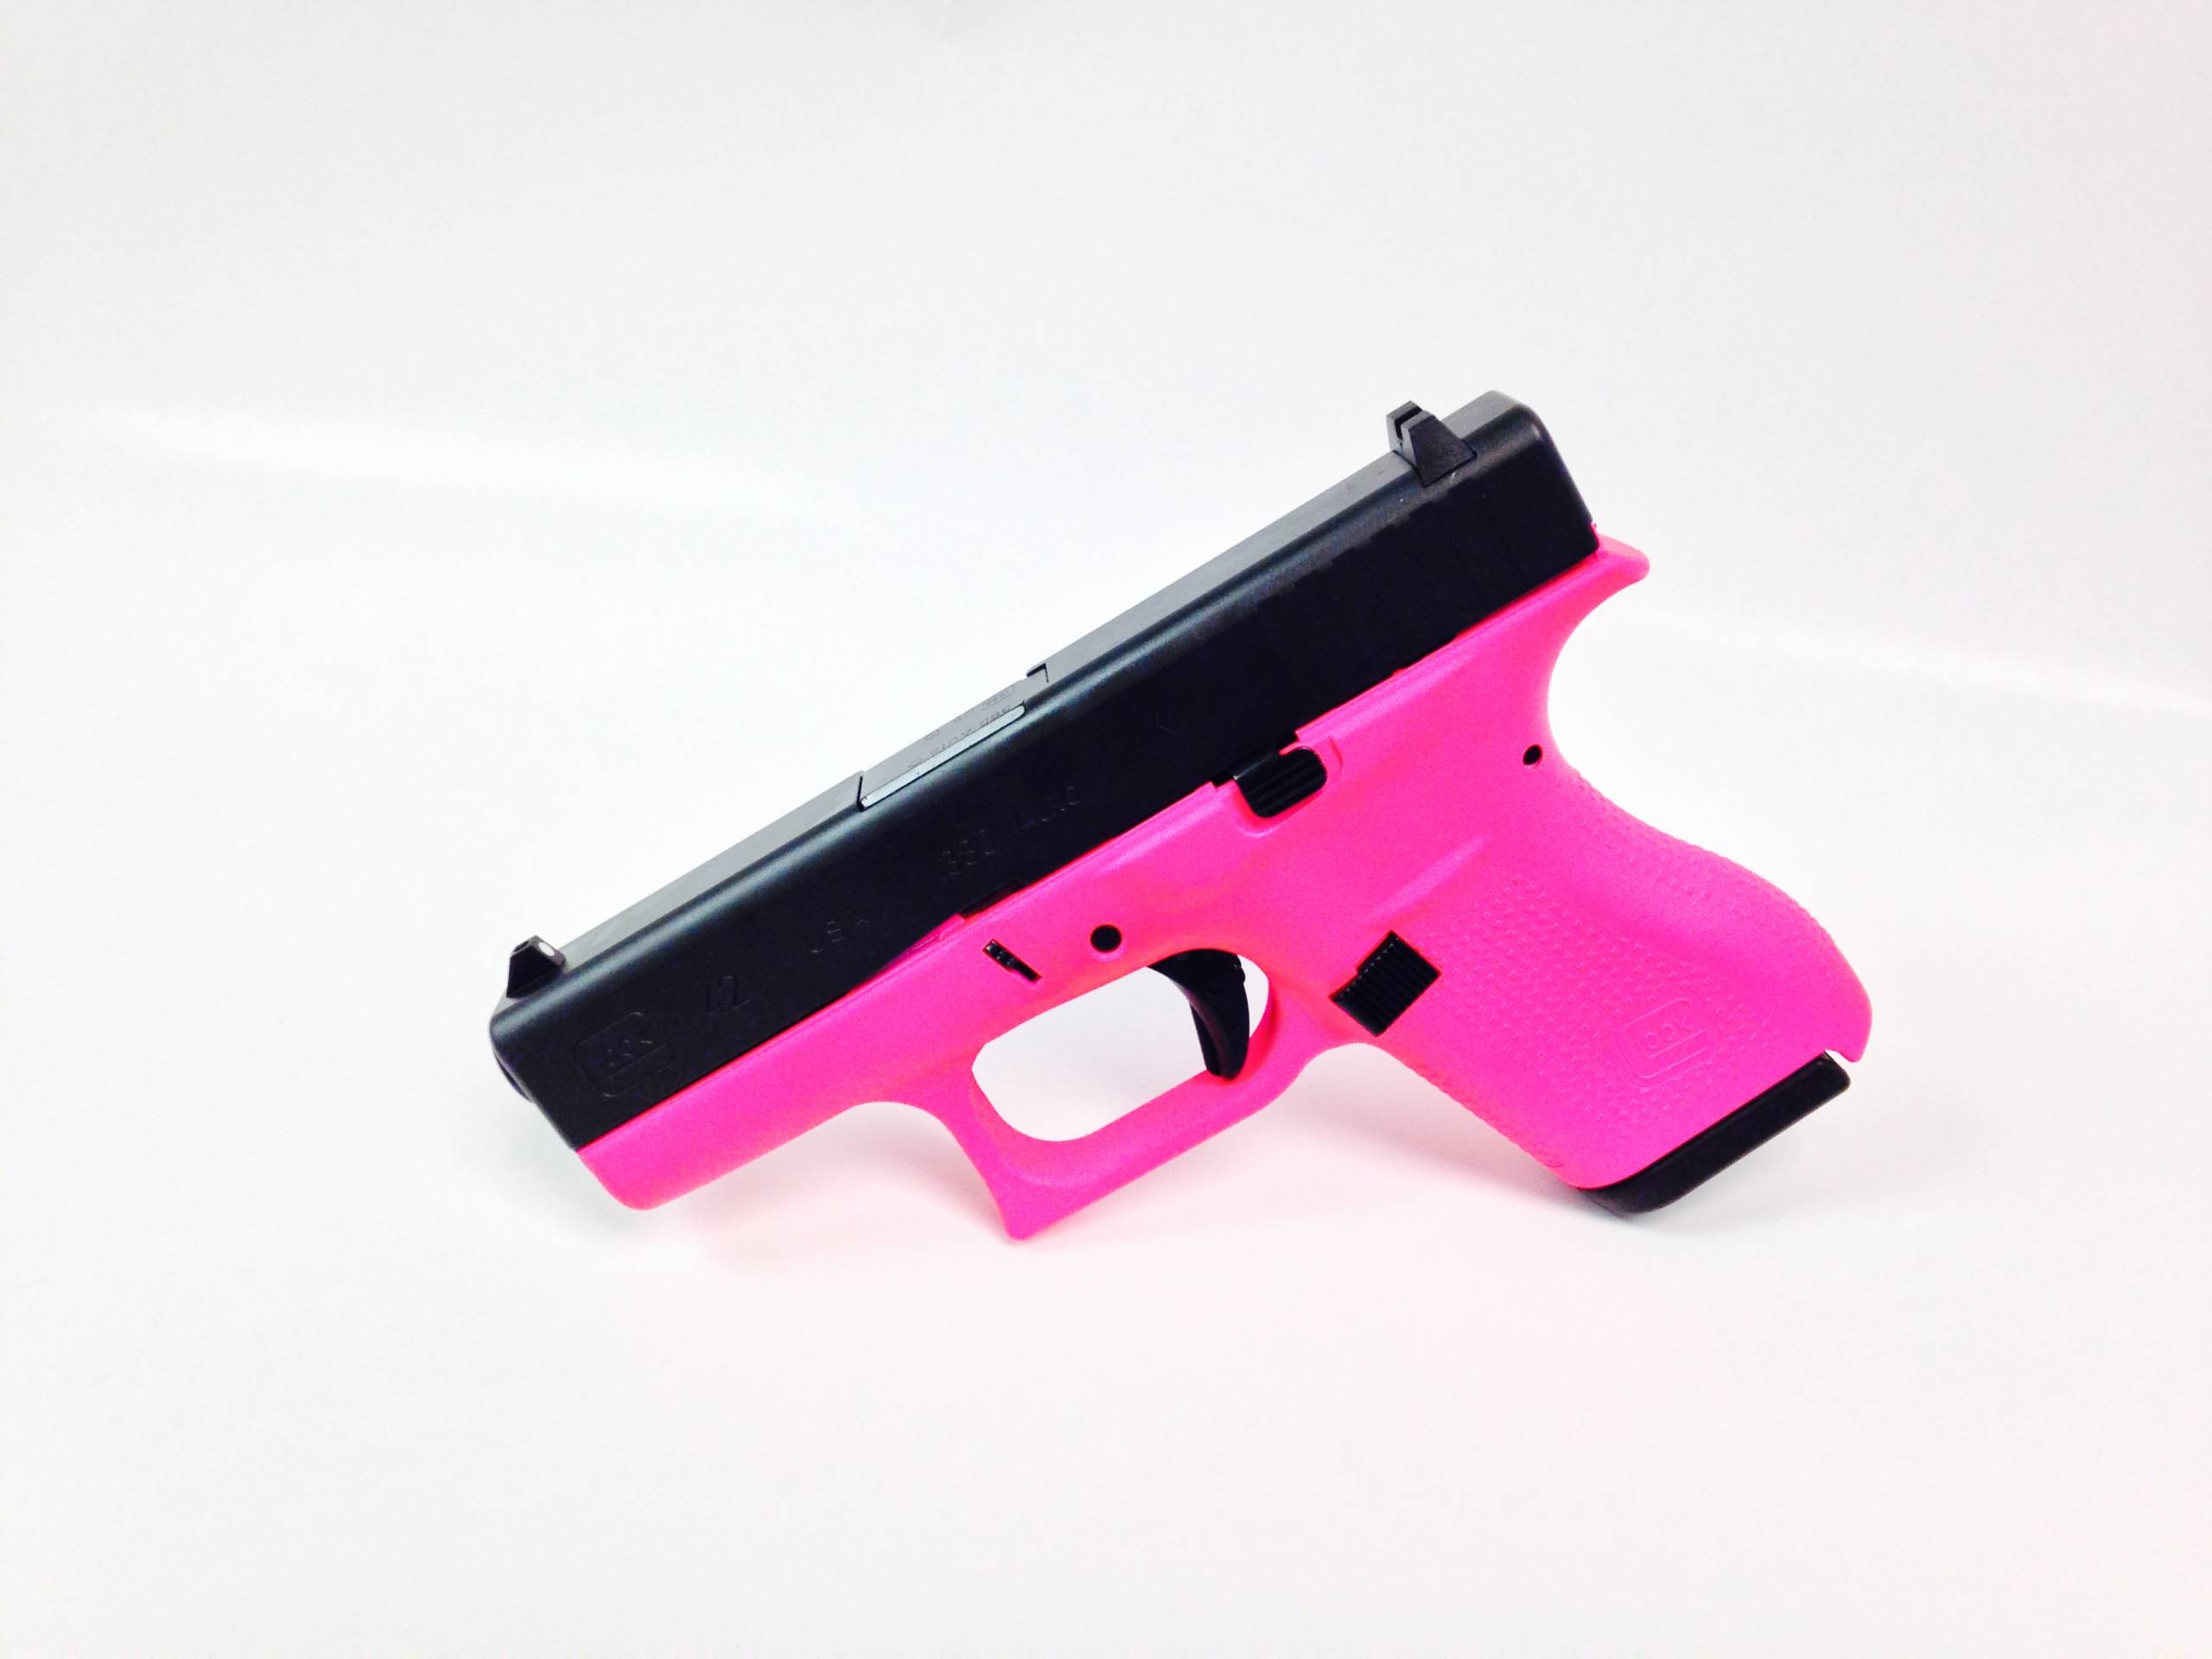 Hot Pink Glock 42 .380 ACP pistol for sale